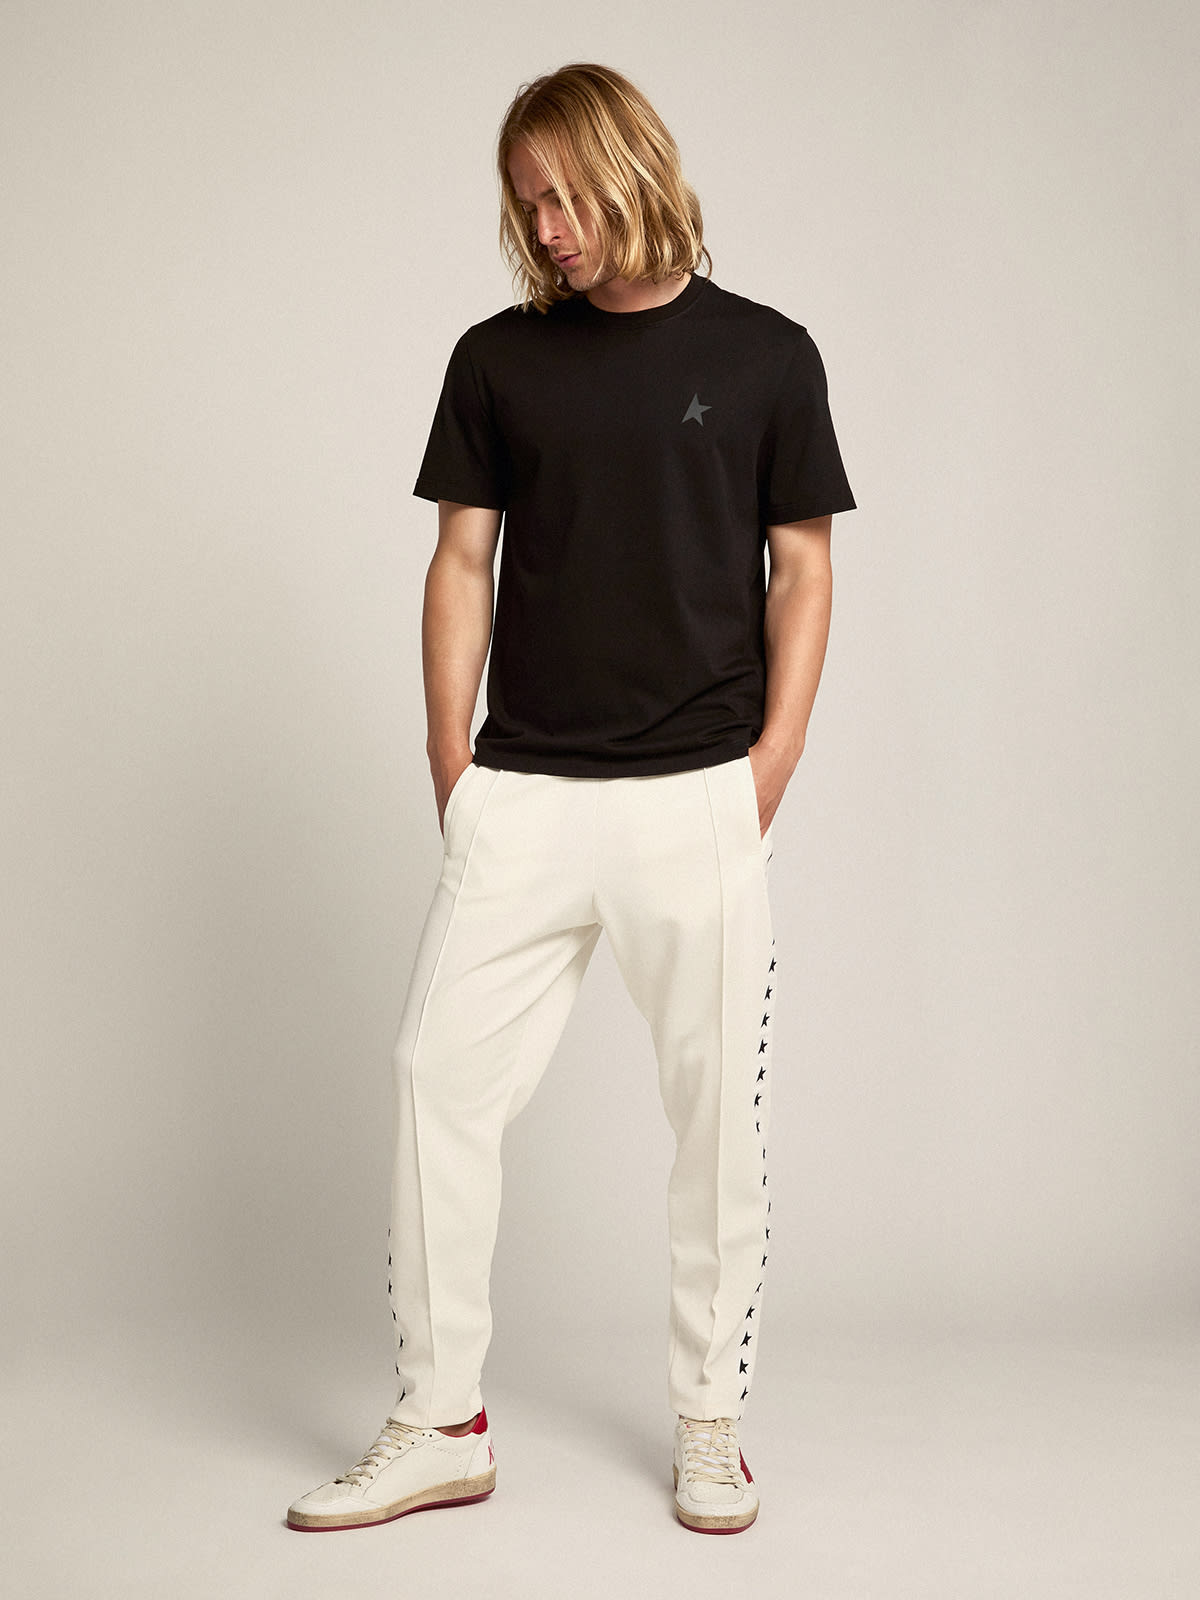 Golden Goose - Men's white joggers with black stars on the sides in 